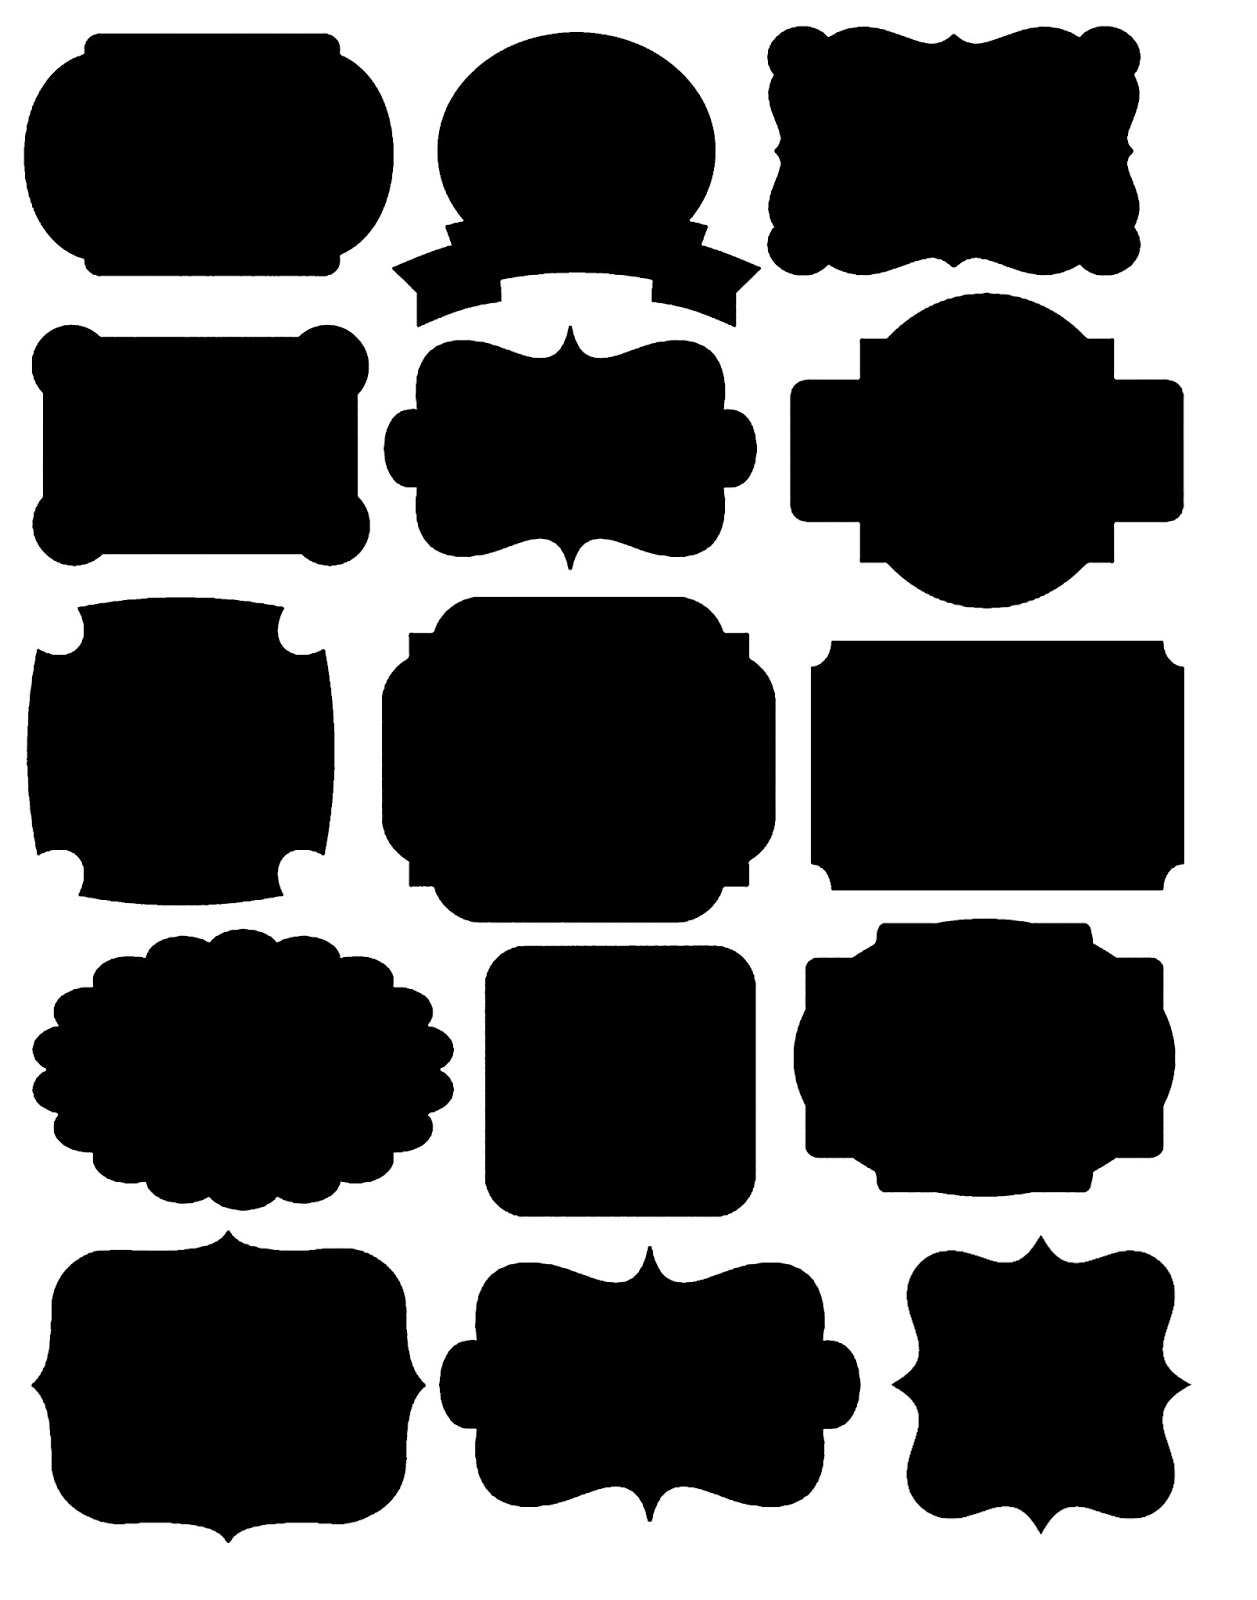 set+of+lovely+labels+silhouette+images+for+cutting+chalkboards+tags+clips+organization